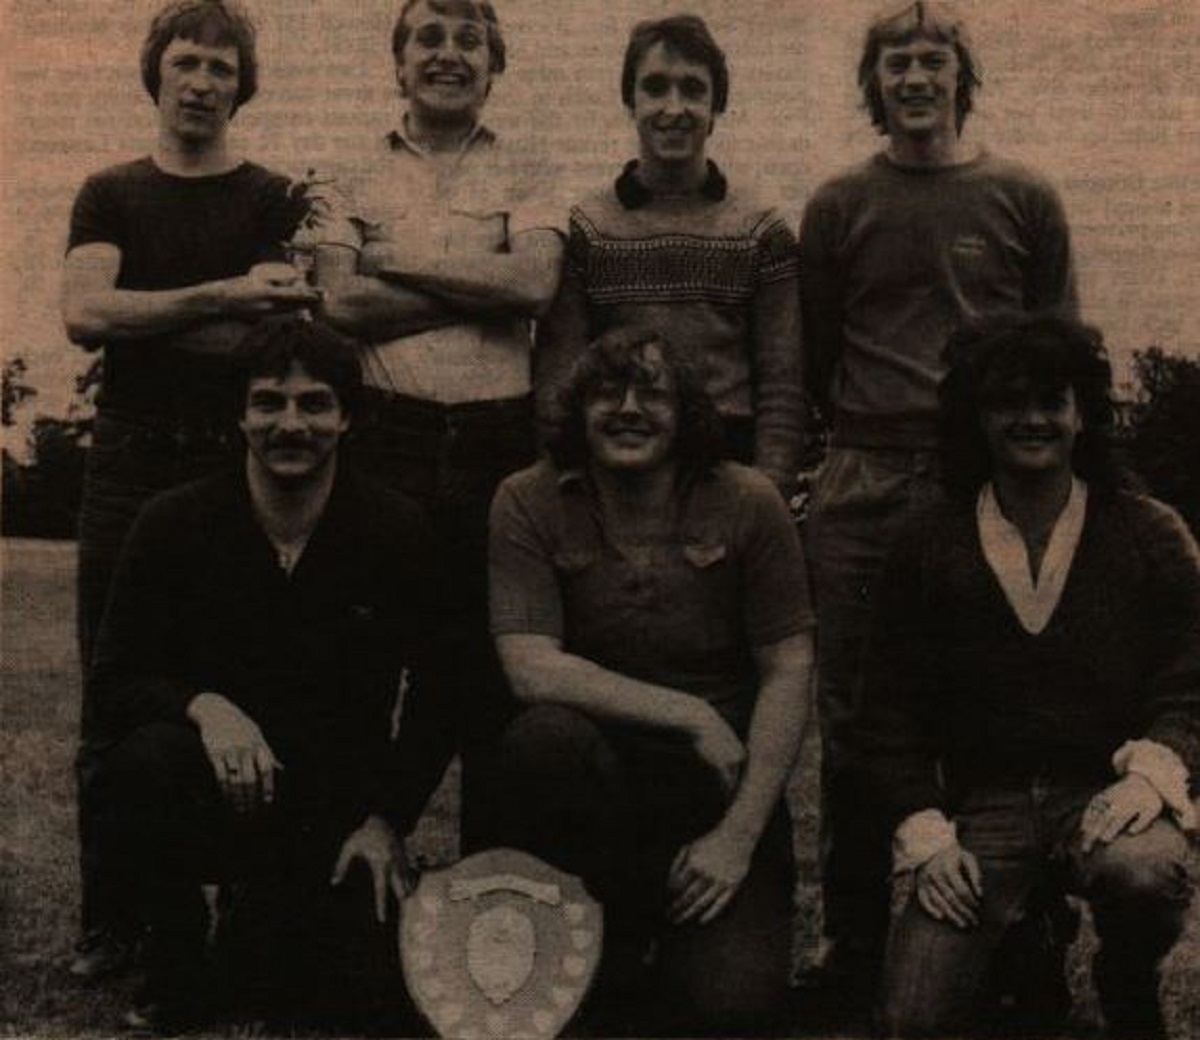 Too hot to handle - a spin-off six-a-side competition was held at Woods in the 1980/81 season and won by Vagabonds. Pictured are some of their winning side with players from the reserves